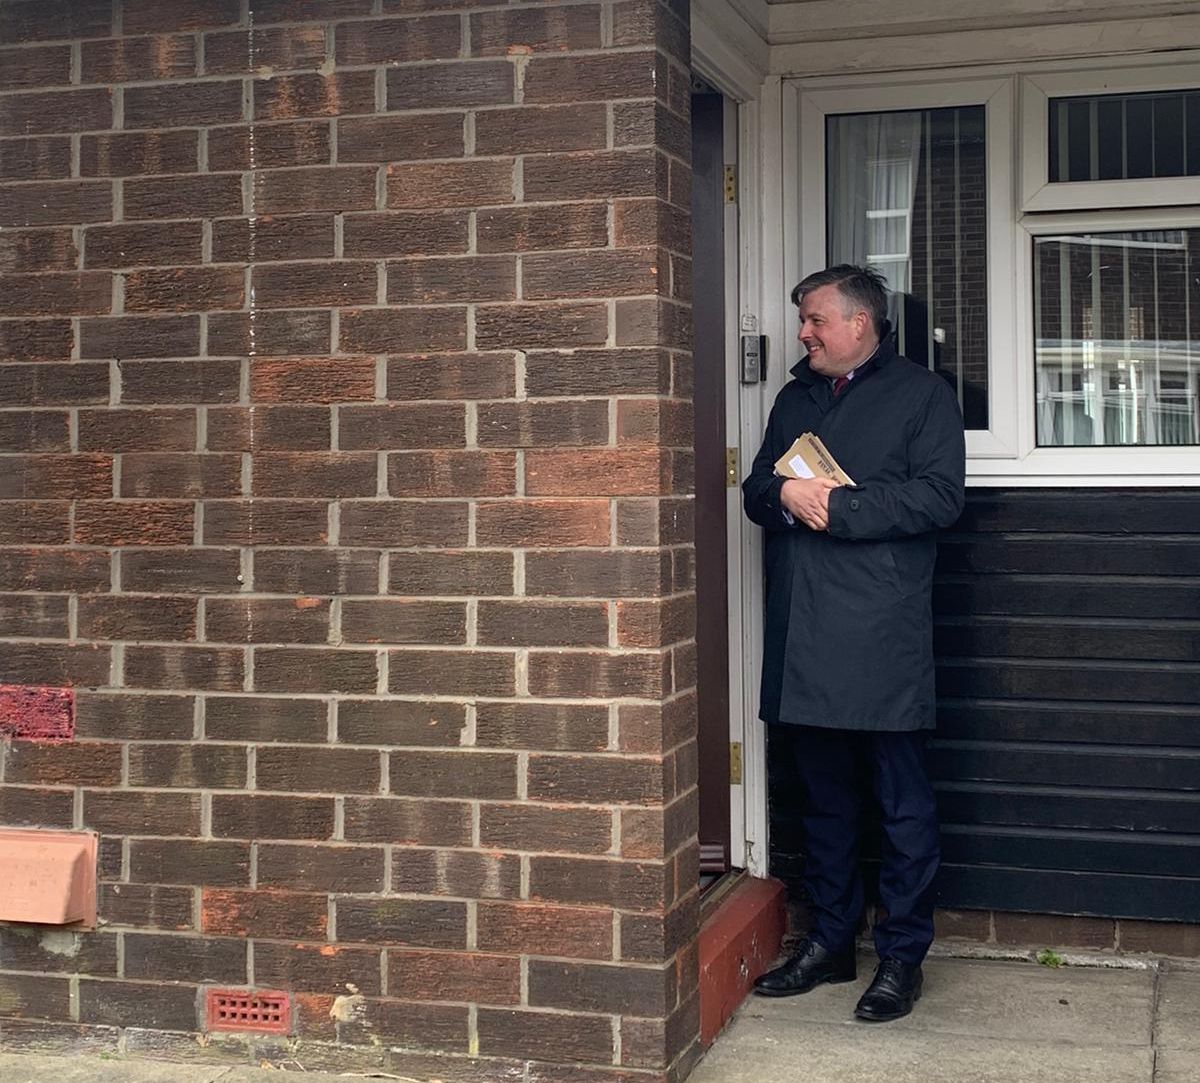 Ashworth meets voters in Sunderland during a visit to the city as part of Labour's local election campaign.